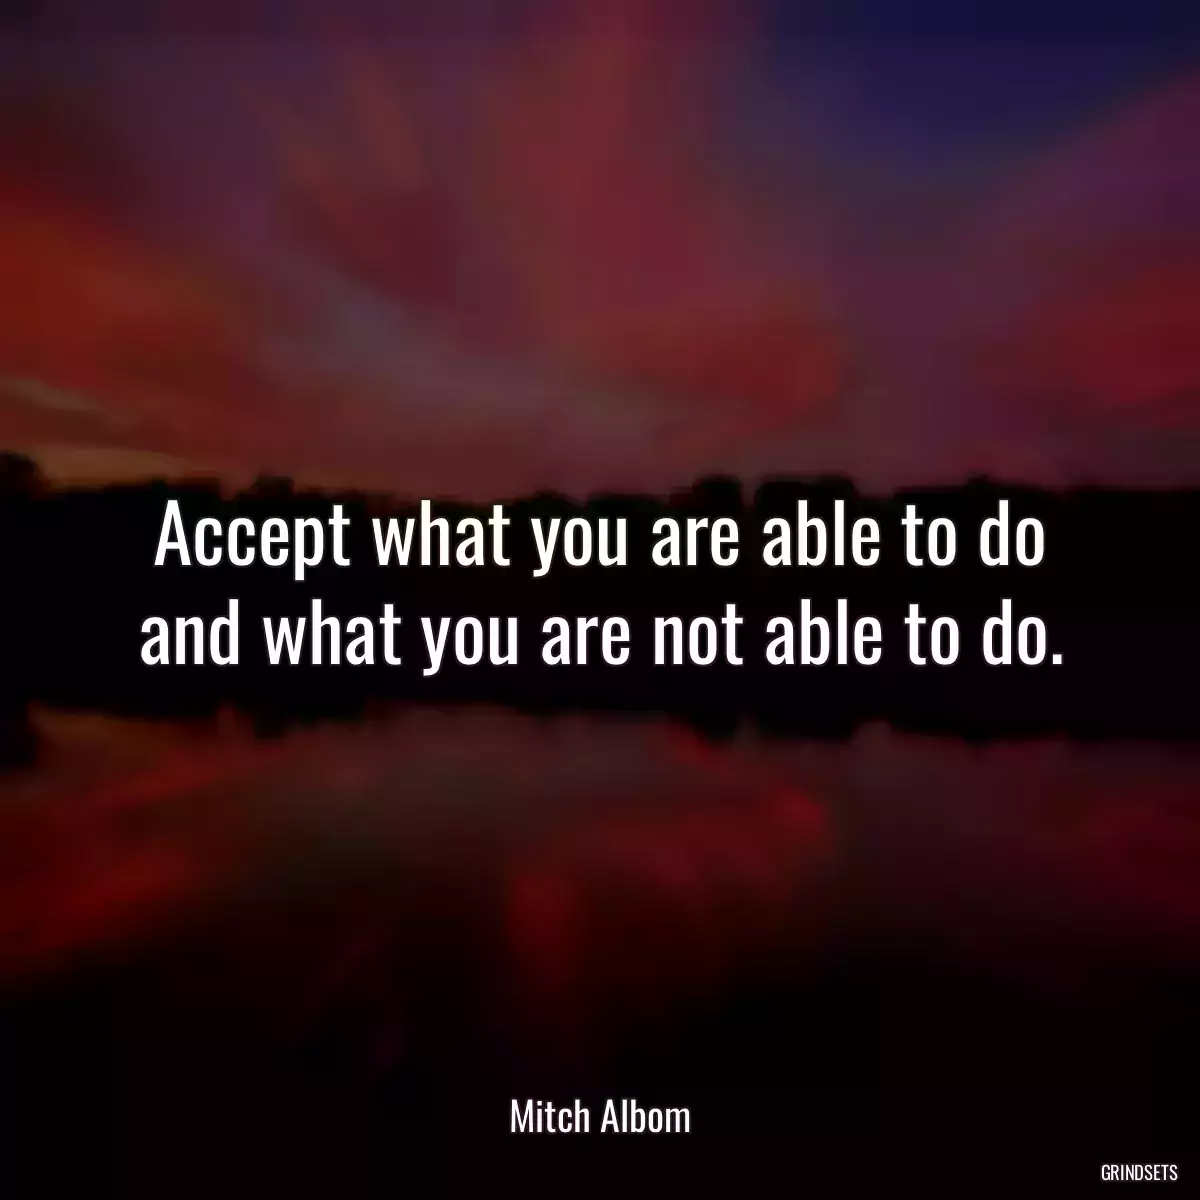 Accept what you are able to do and what you are not able to do.